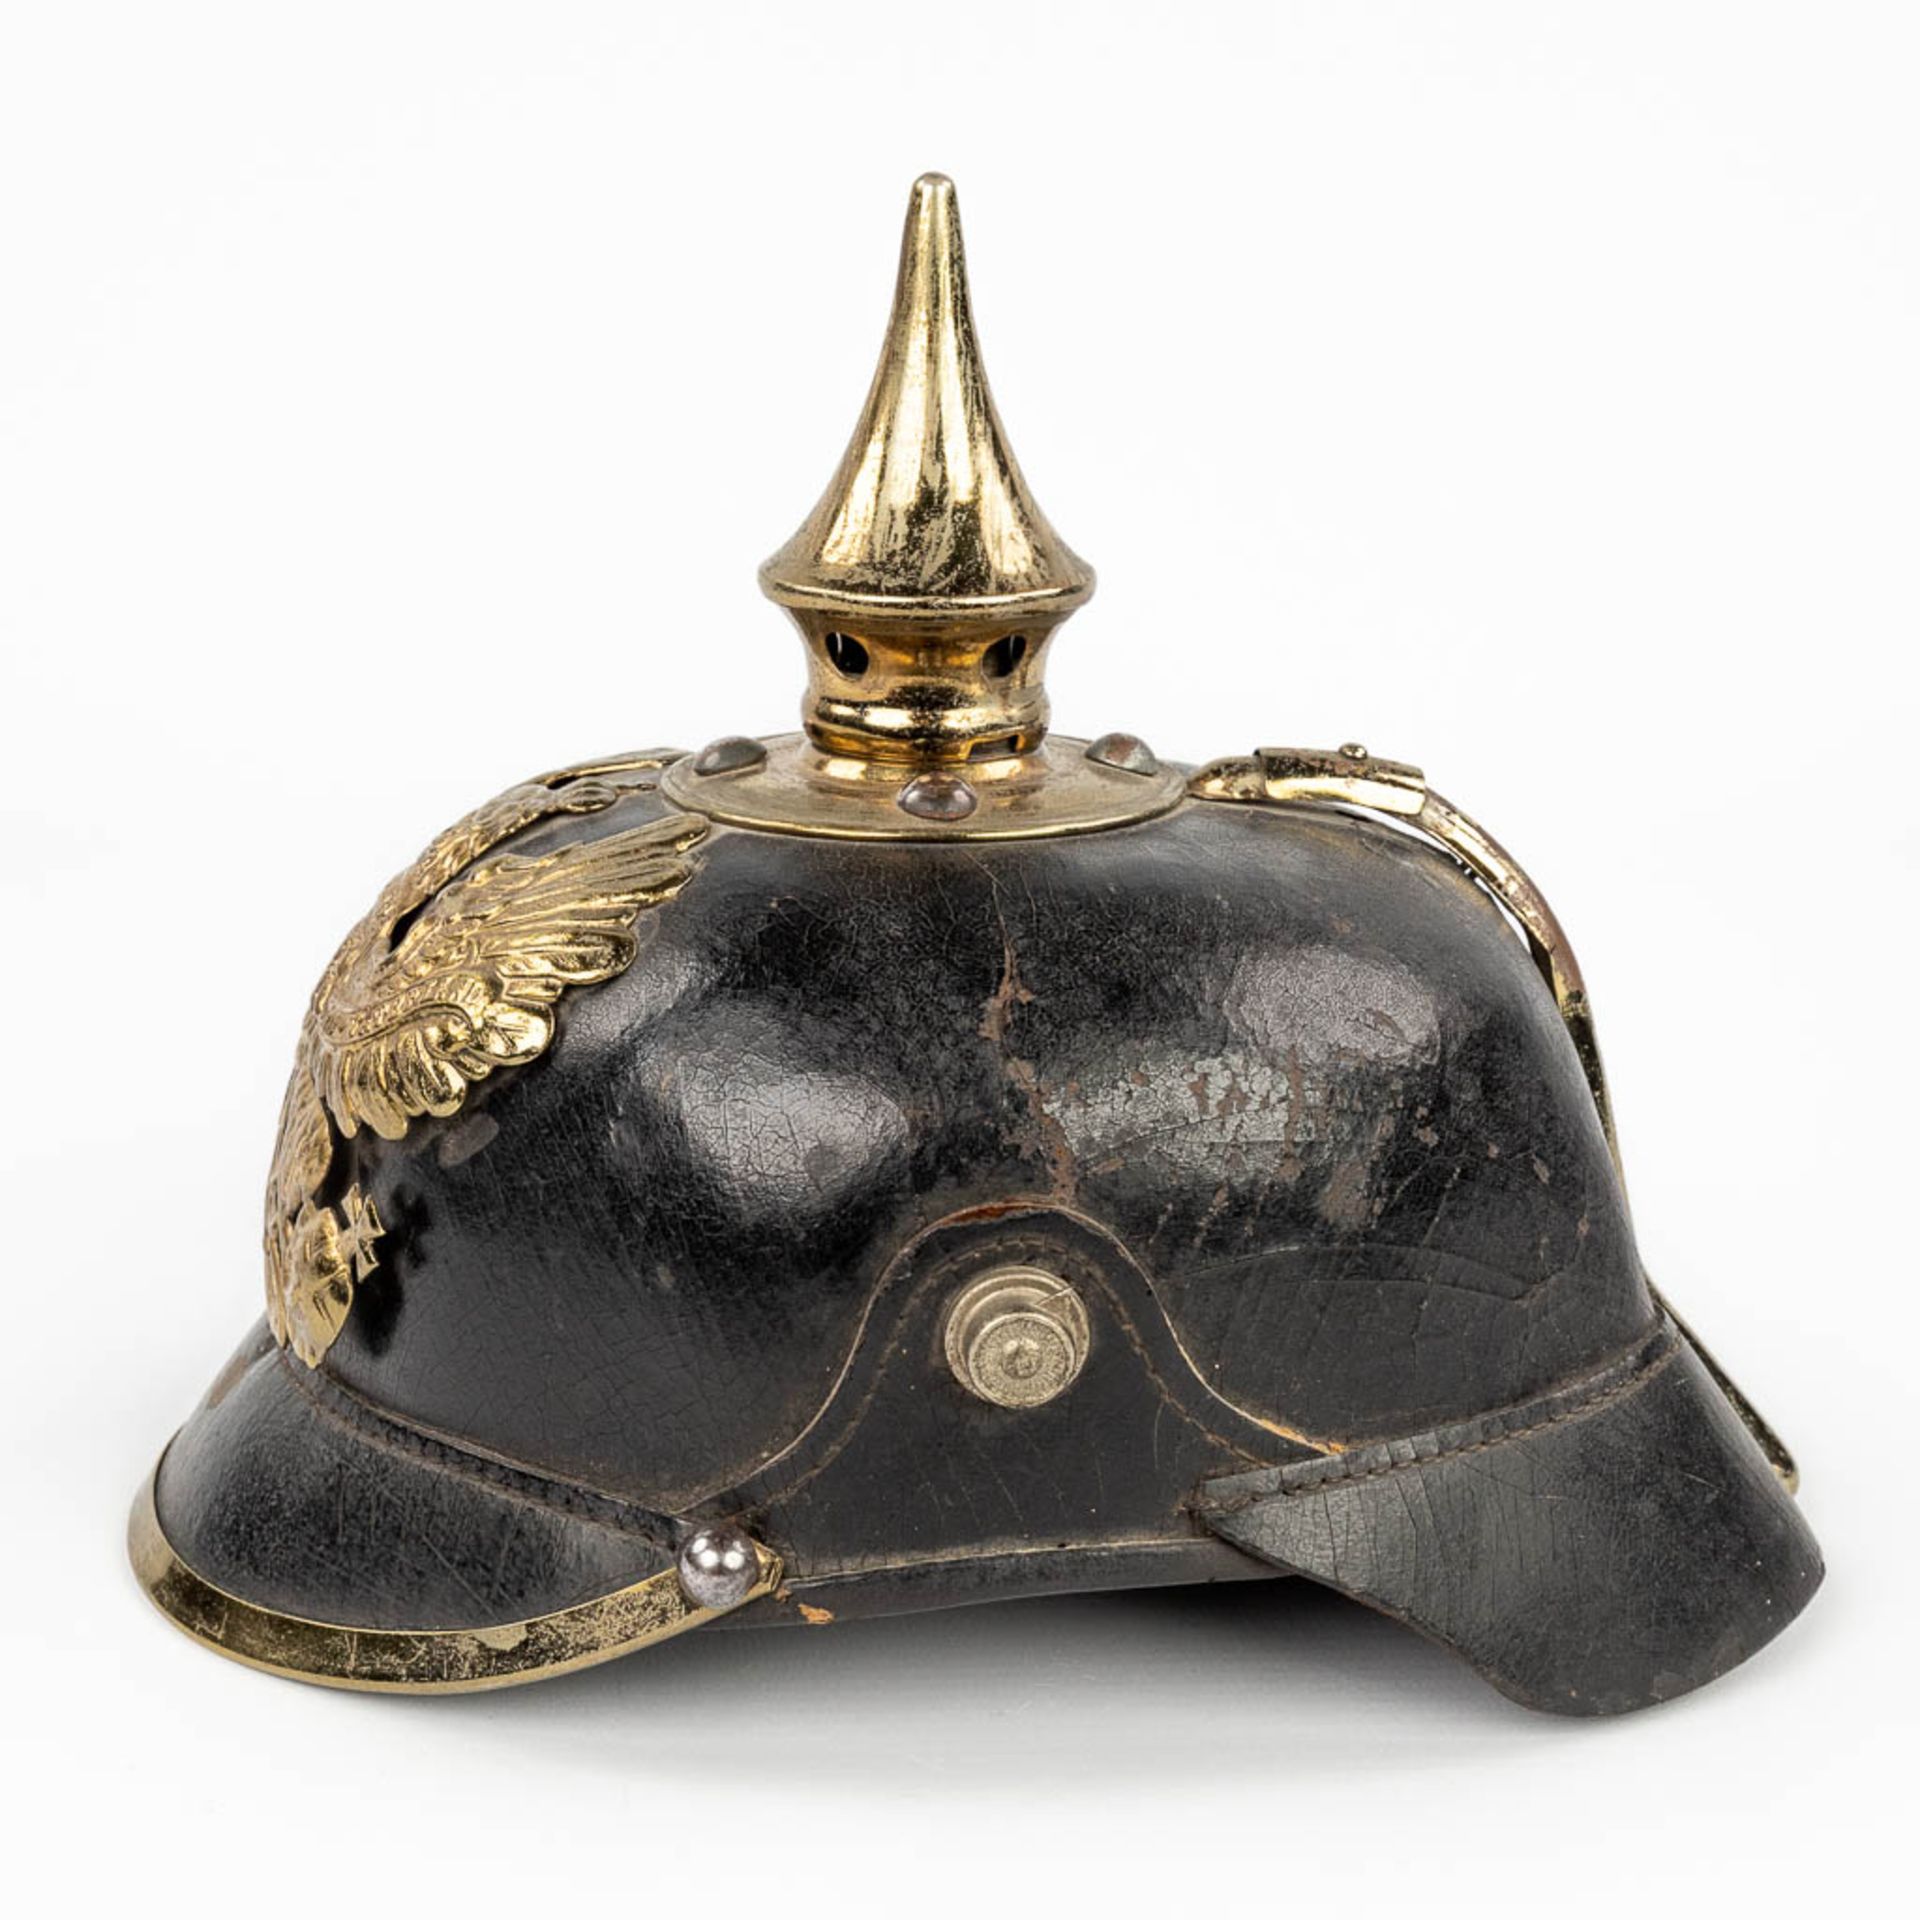 An antique German 'Pickelhaube' decorated with an eagle. Dating 1914-1918. (L:25 x W:18 x H:21 cm) - Bild 3 aus 17